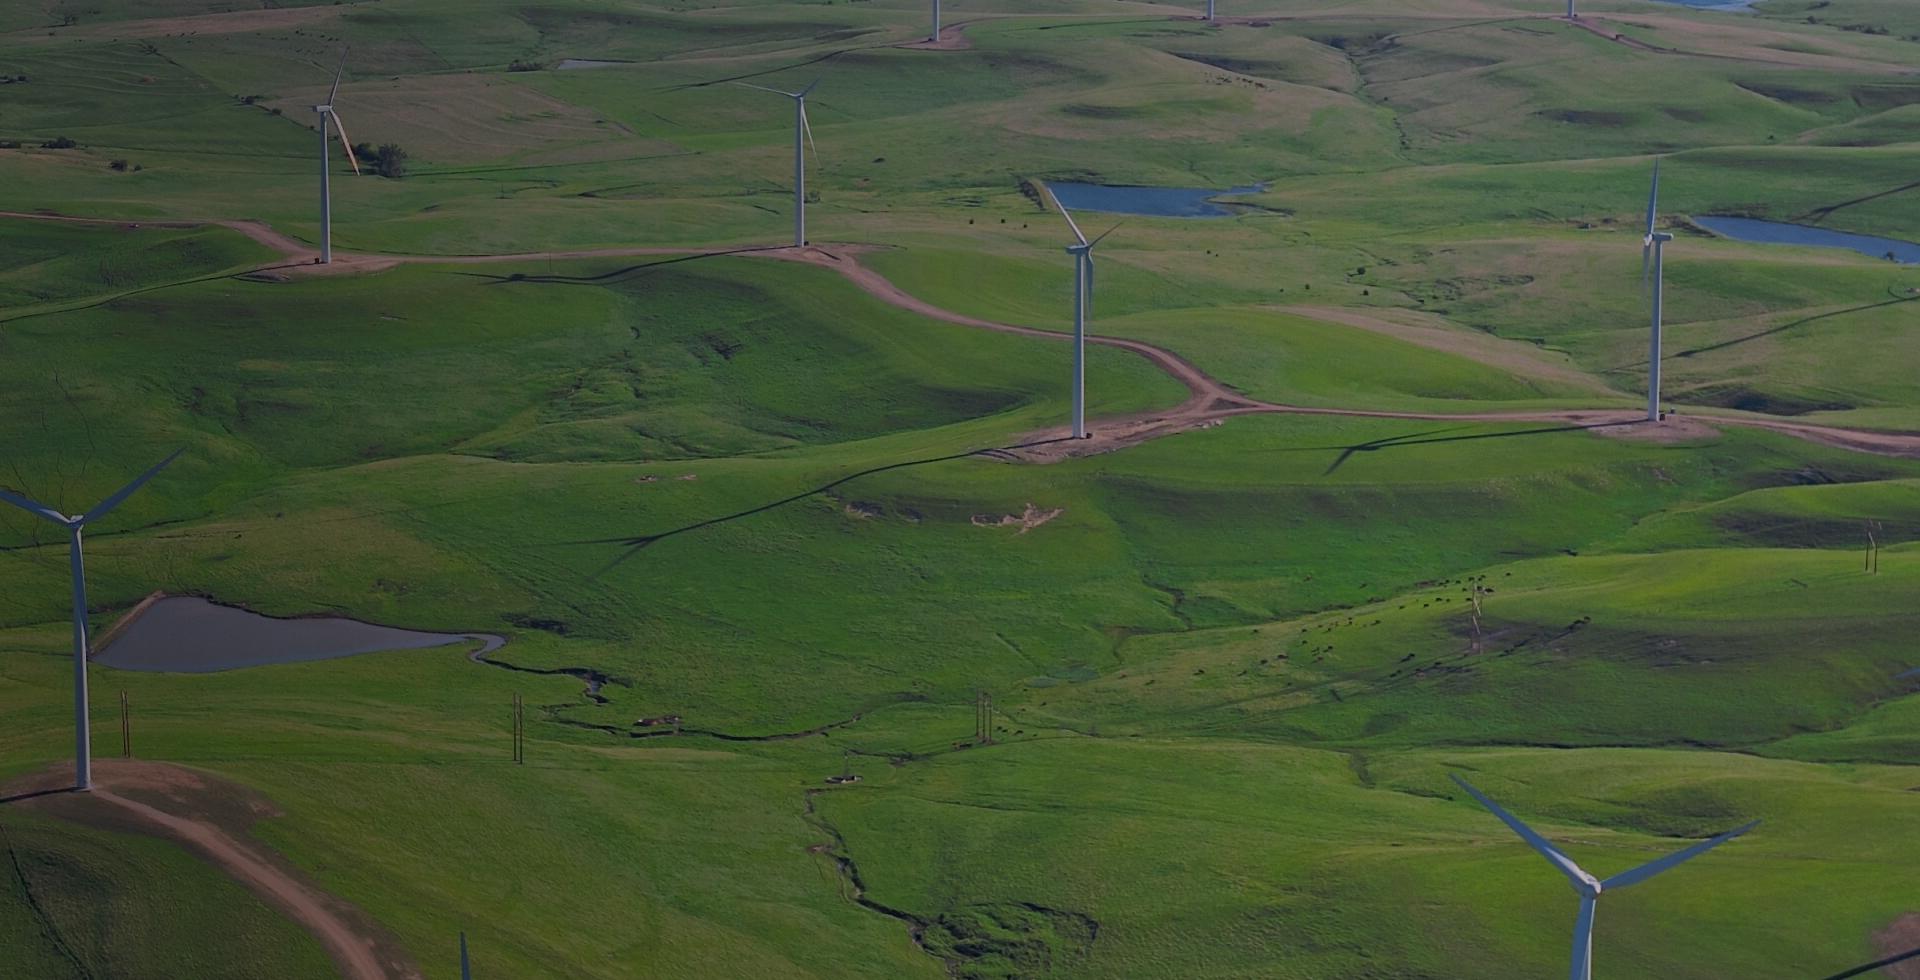 A wind turbine stands tall in a landscape of rolling green hills.